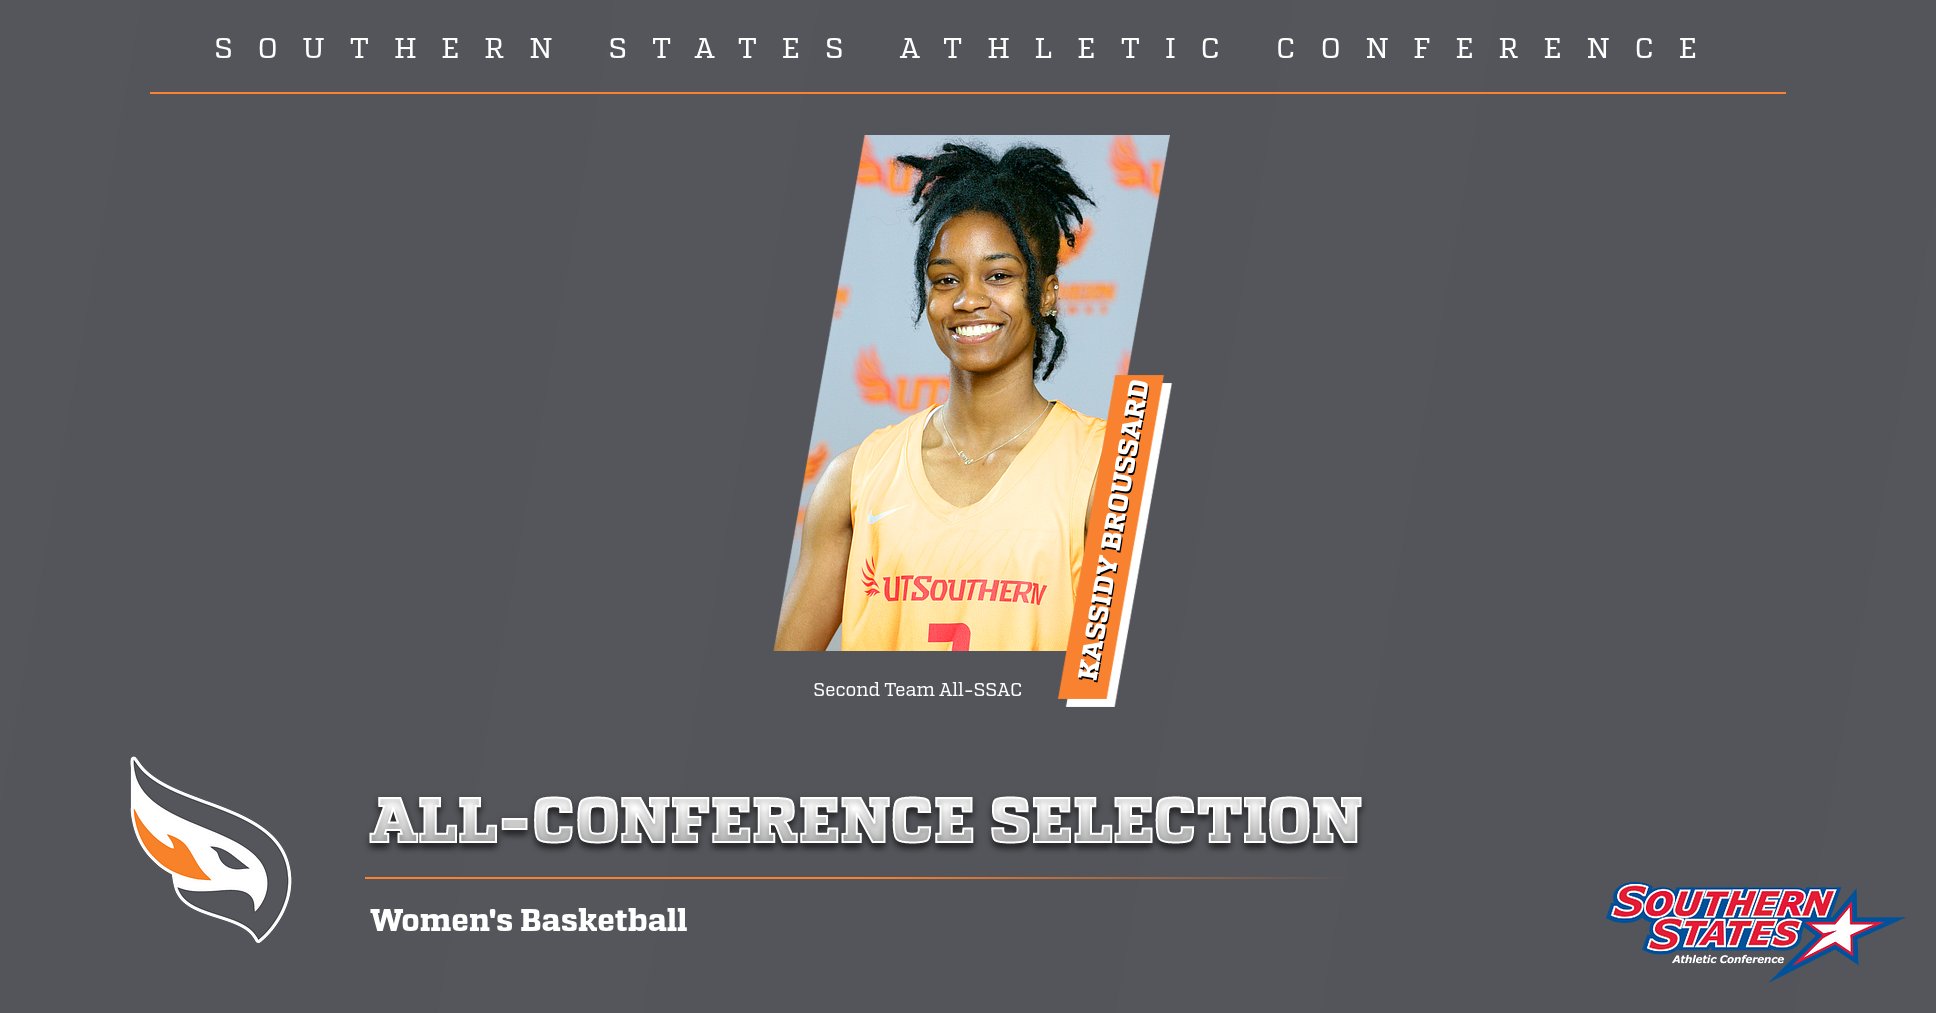 Broussard Named to Southern States Athletic Conference Second Team